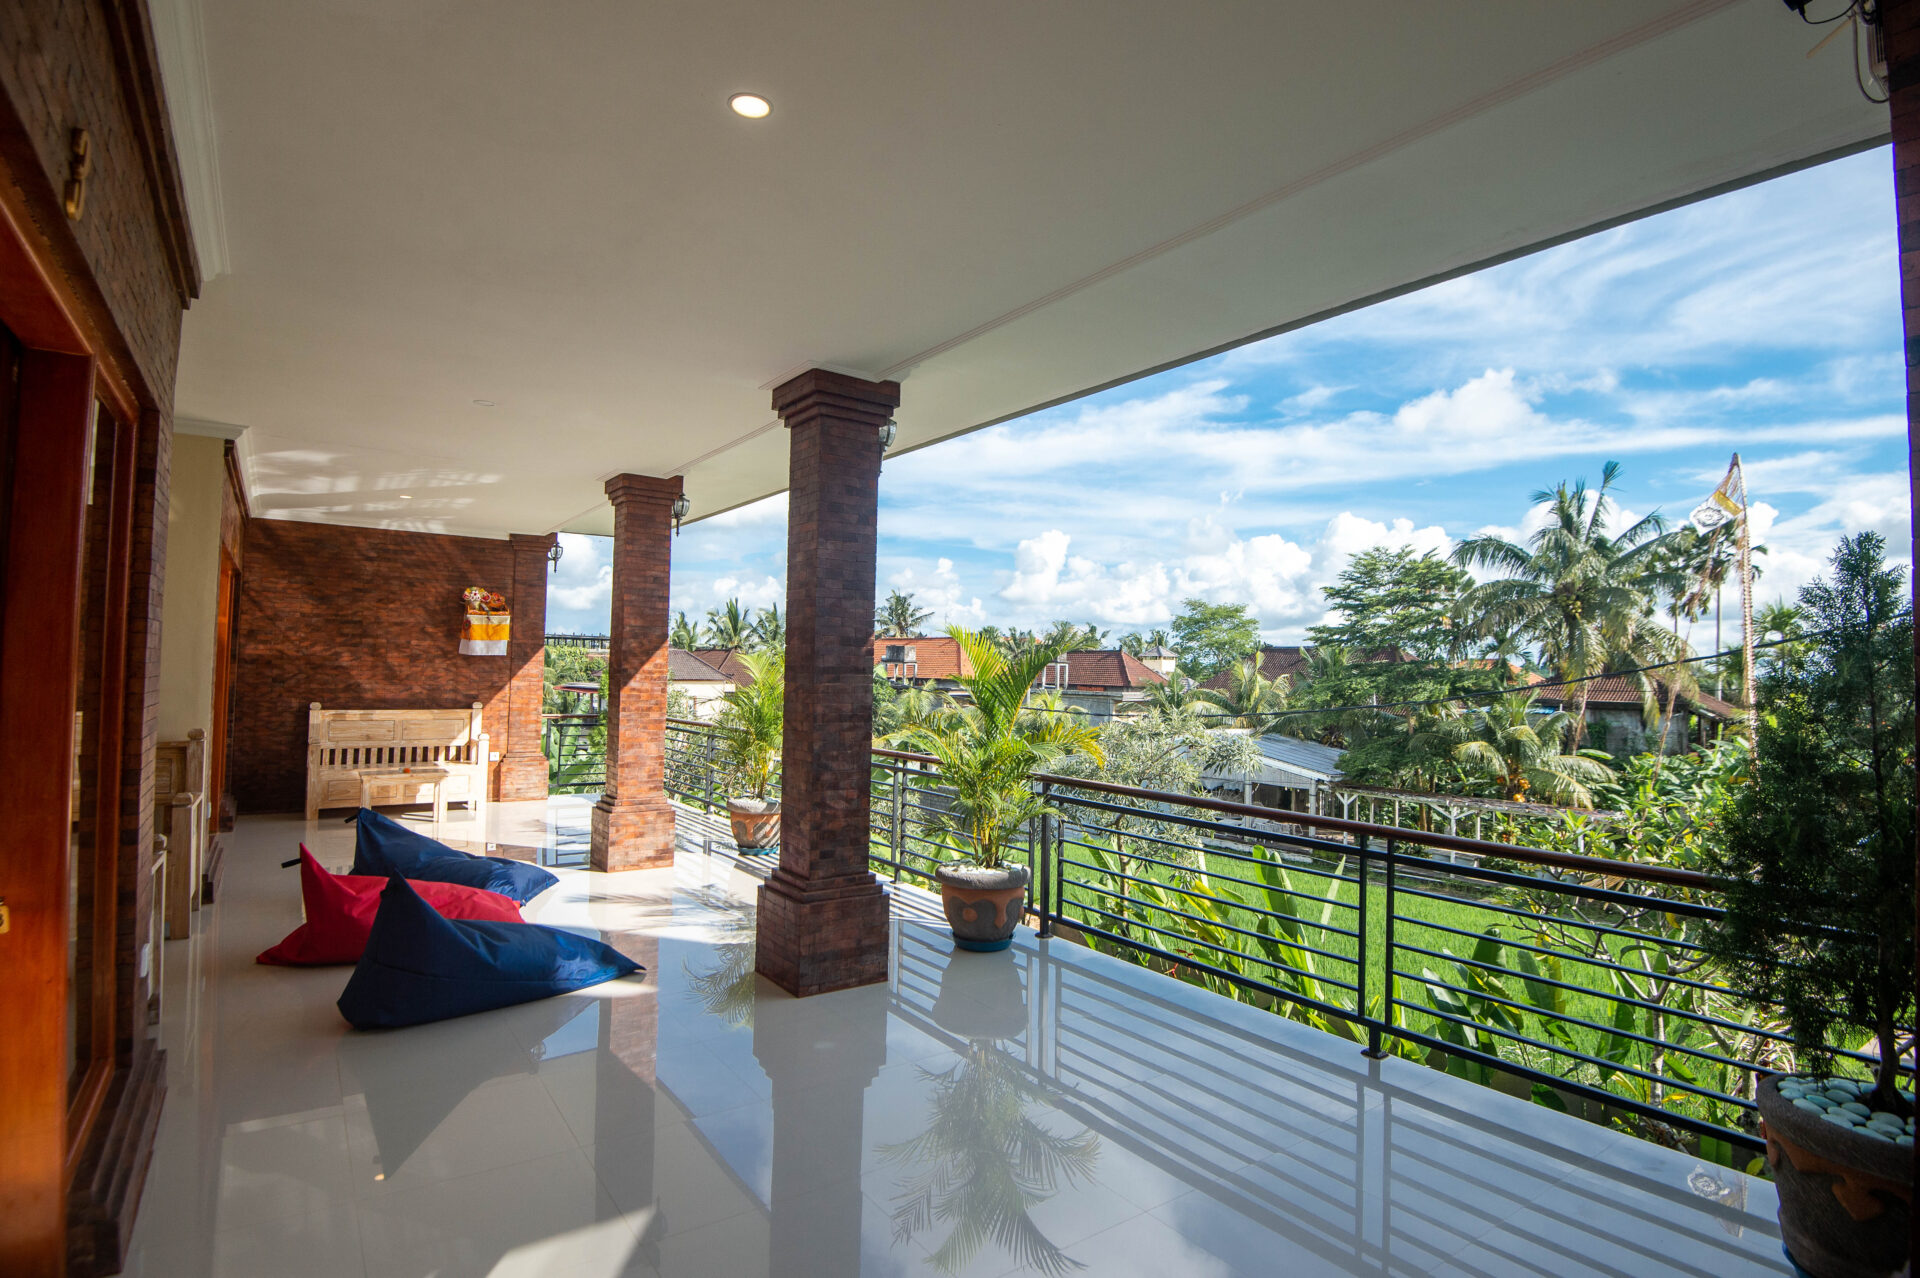 2 Bedrooms Ubud for Monthly Rent